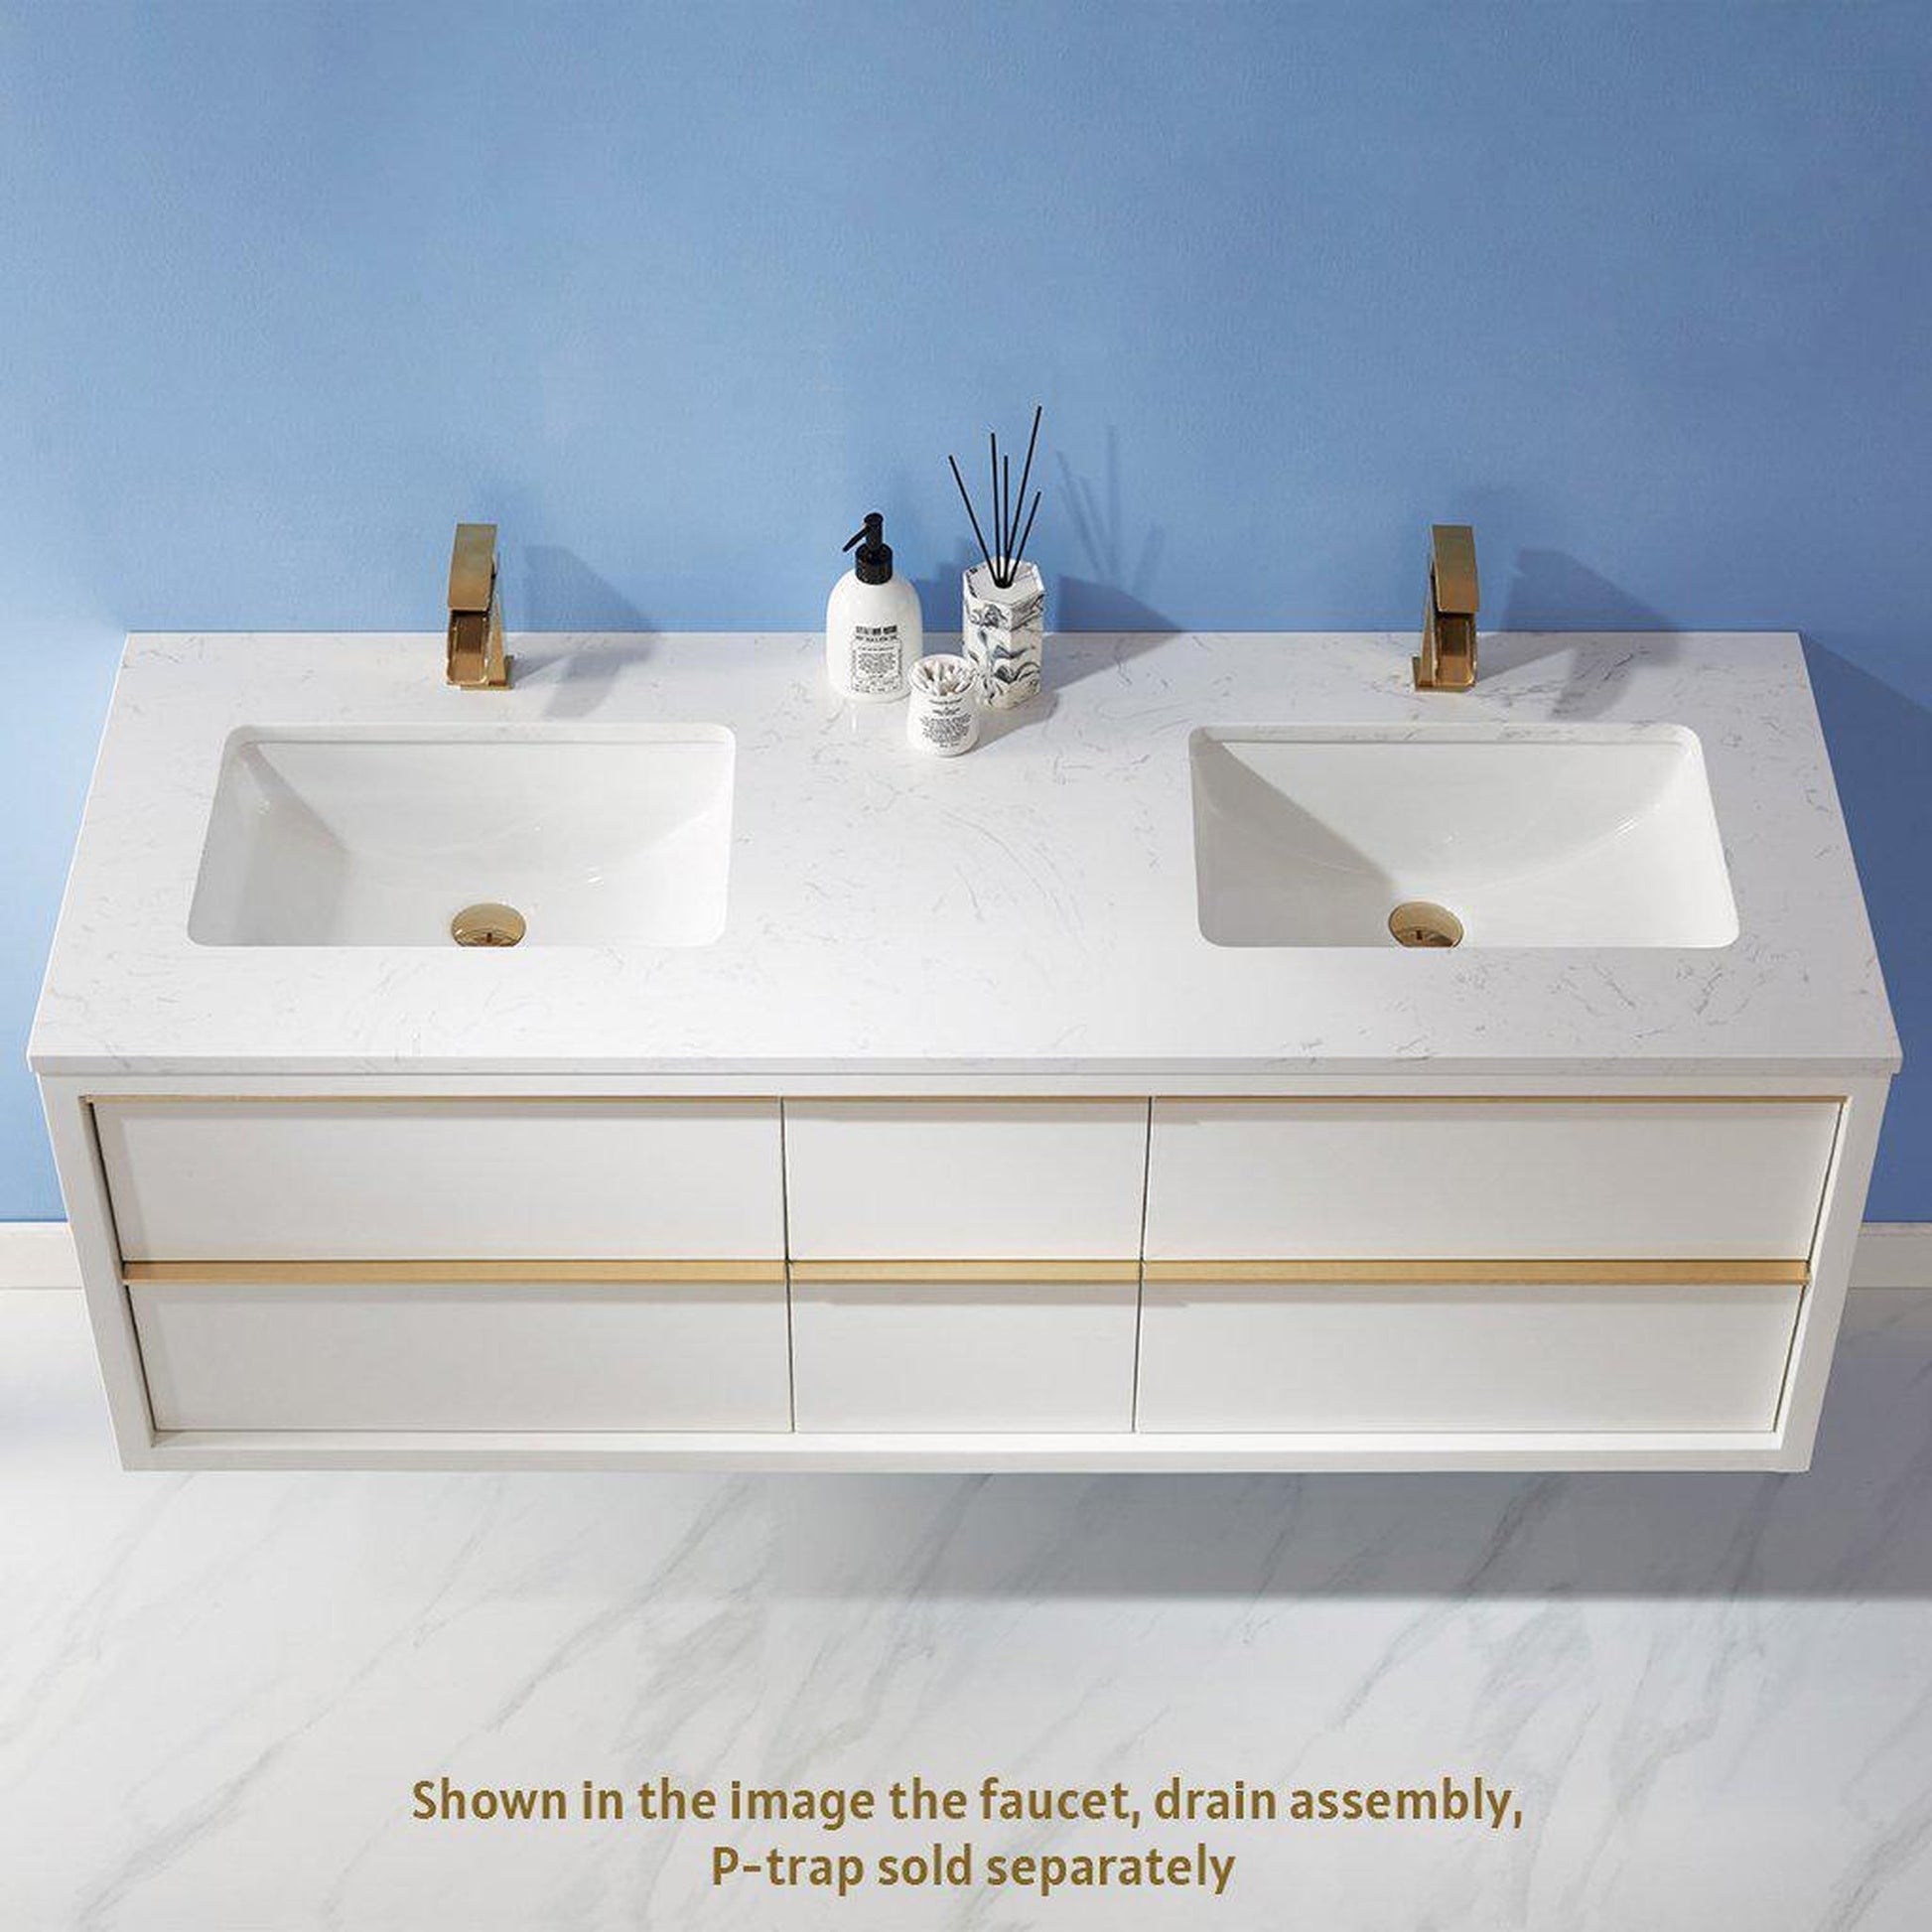 Altair Morgan 60" Double White Wall-Mounted Bathroom Vanity Set With Aosta White Composite Stone Top, Two Rectangular Undermount Ceramic Sinks, and Overflow